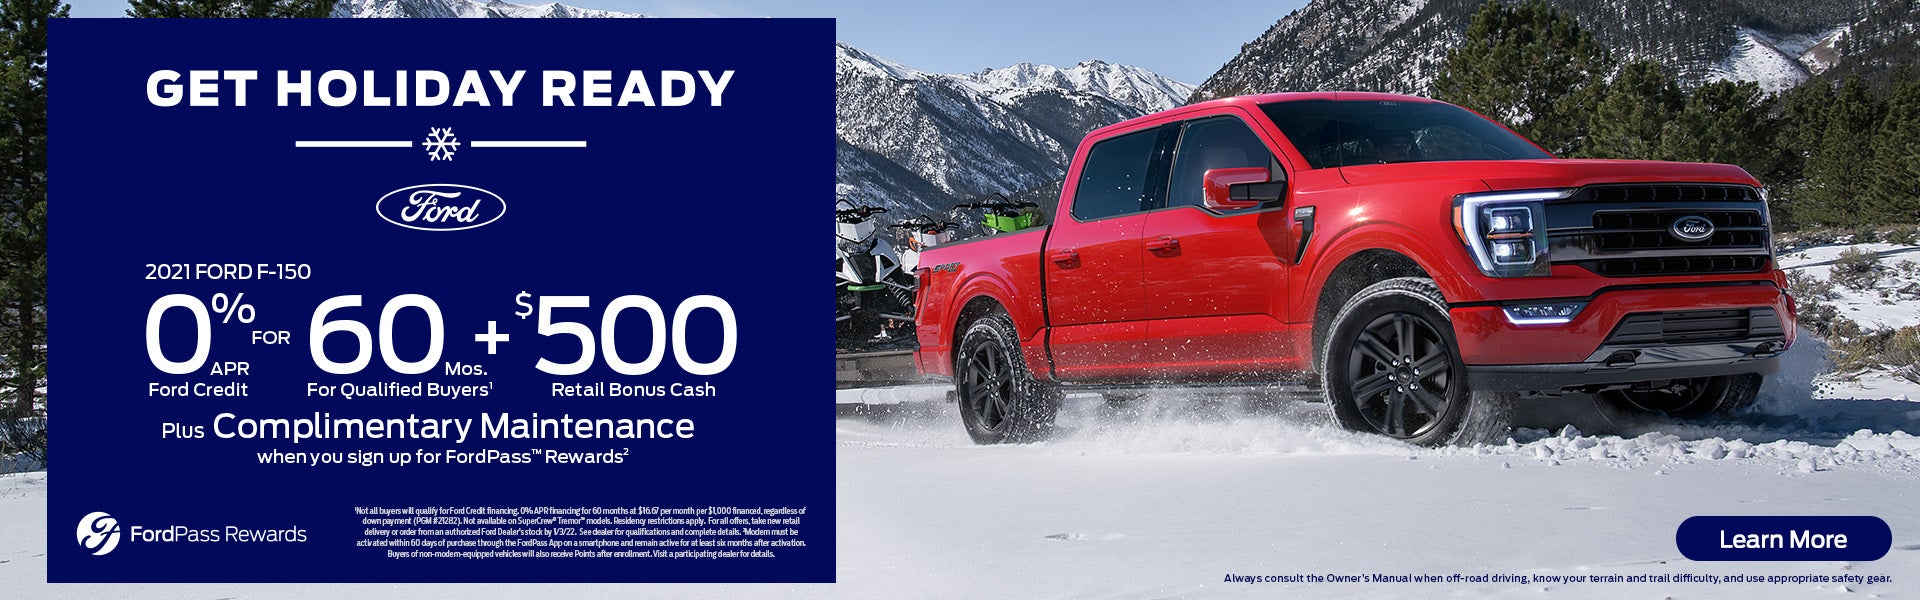 Get Holiday Ready with Stivers Ford Lincoln in Waukee, IA